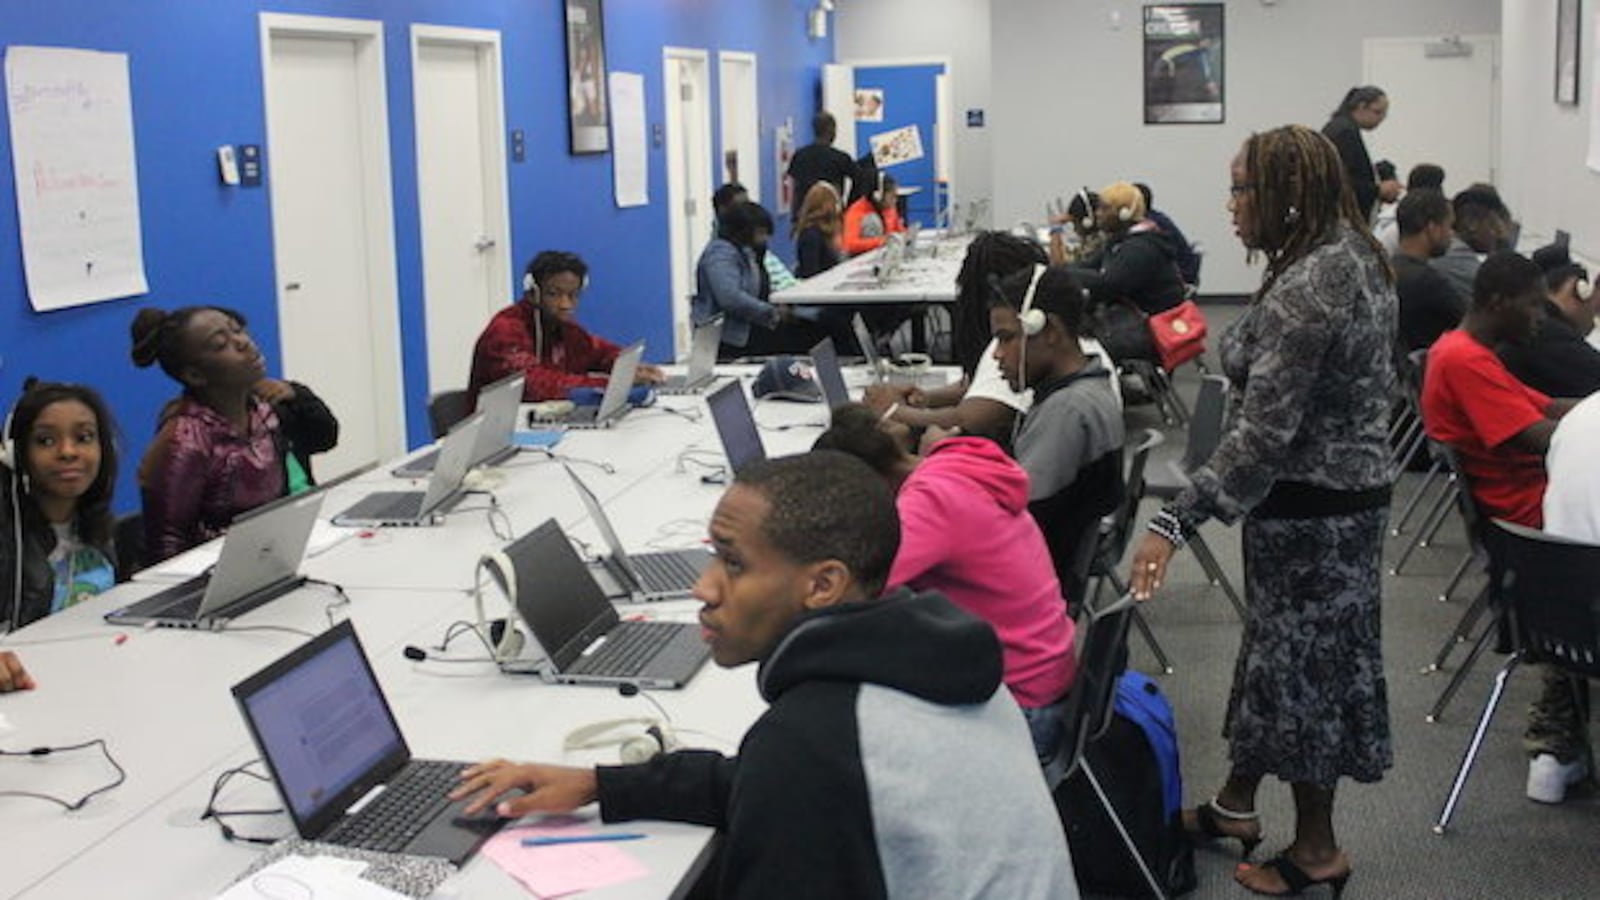 Students work on computers at a Bridgescape school run by EdisonLearning in the Englewood neighborhood of Chicago that closed in 2017.